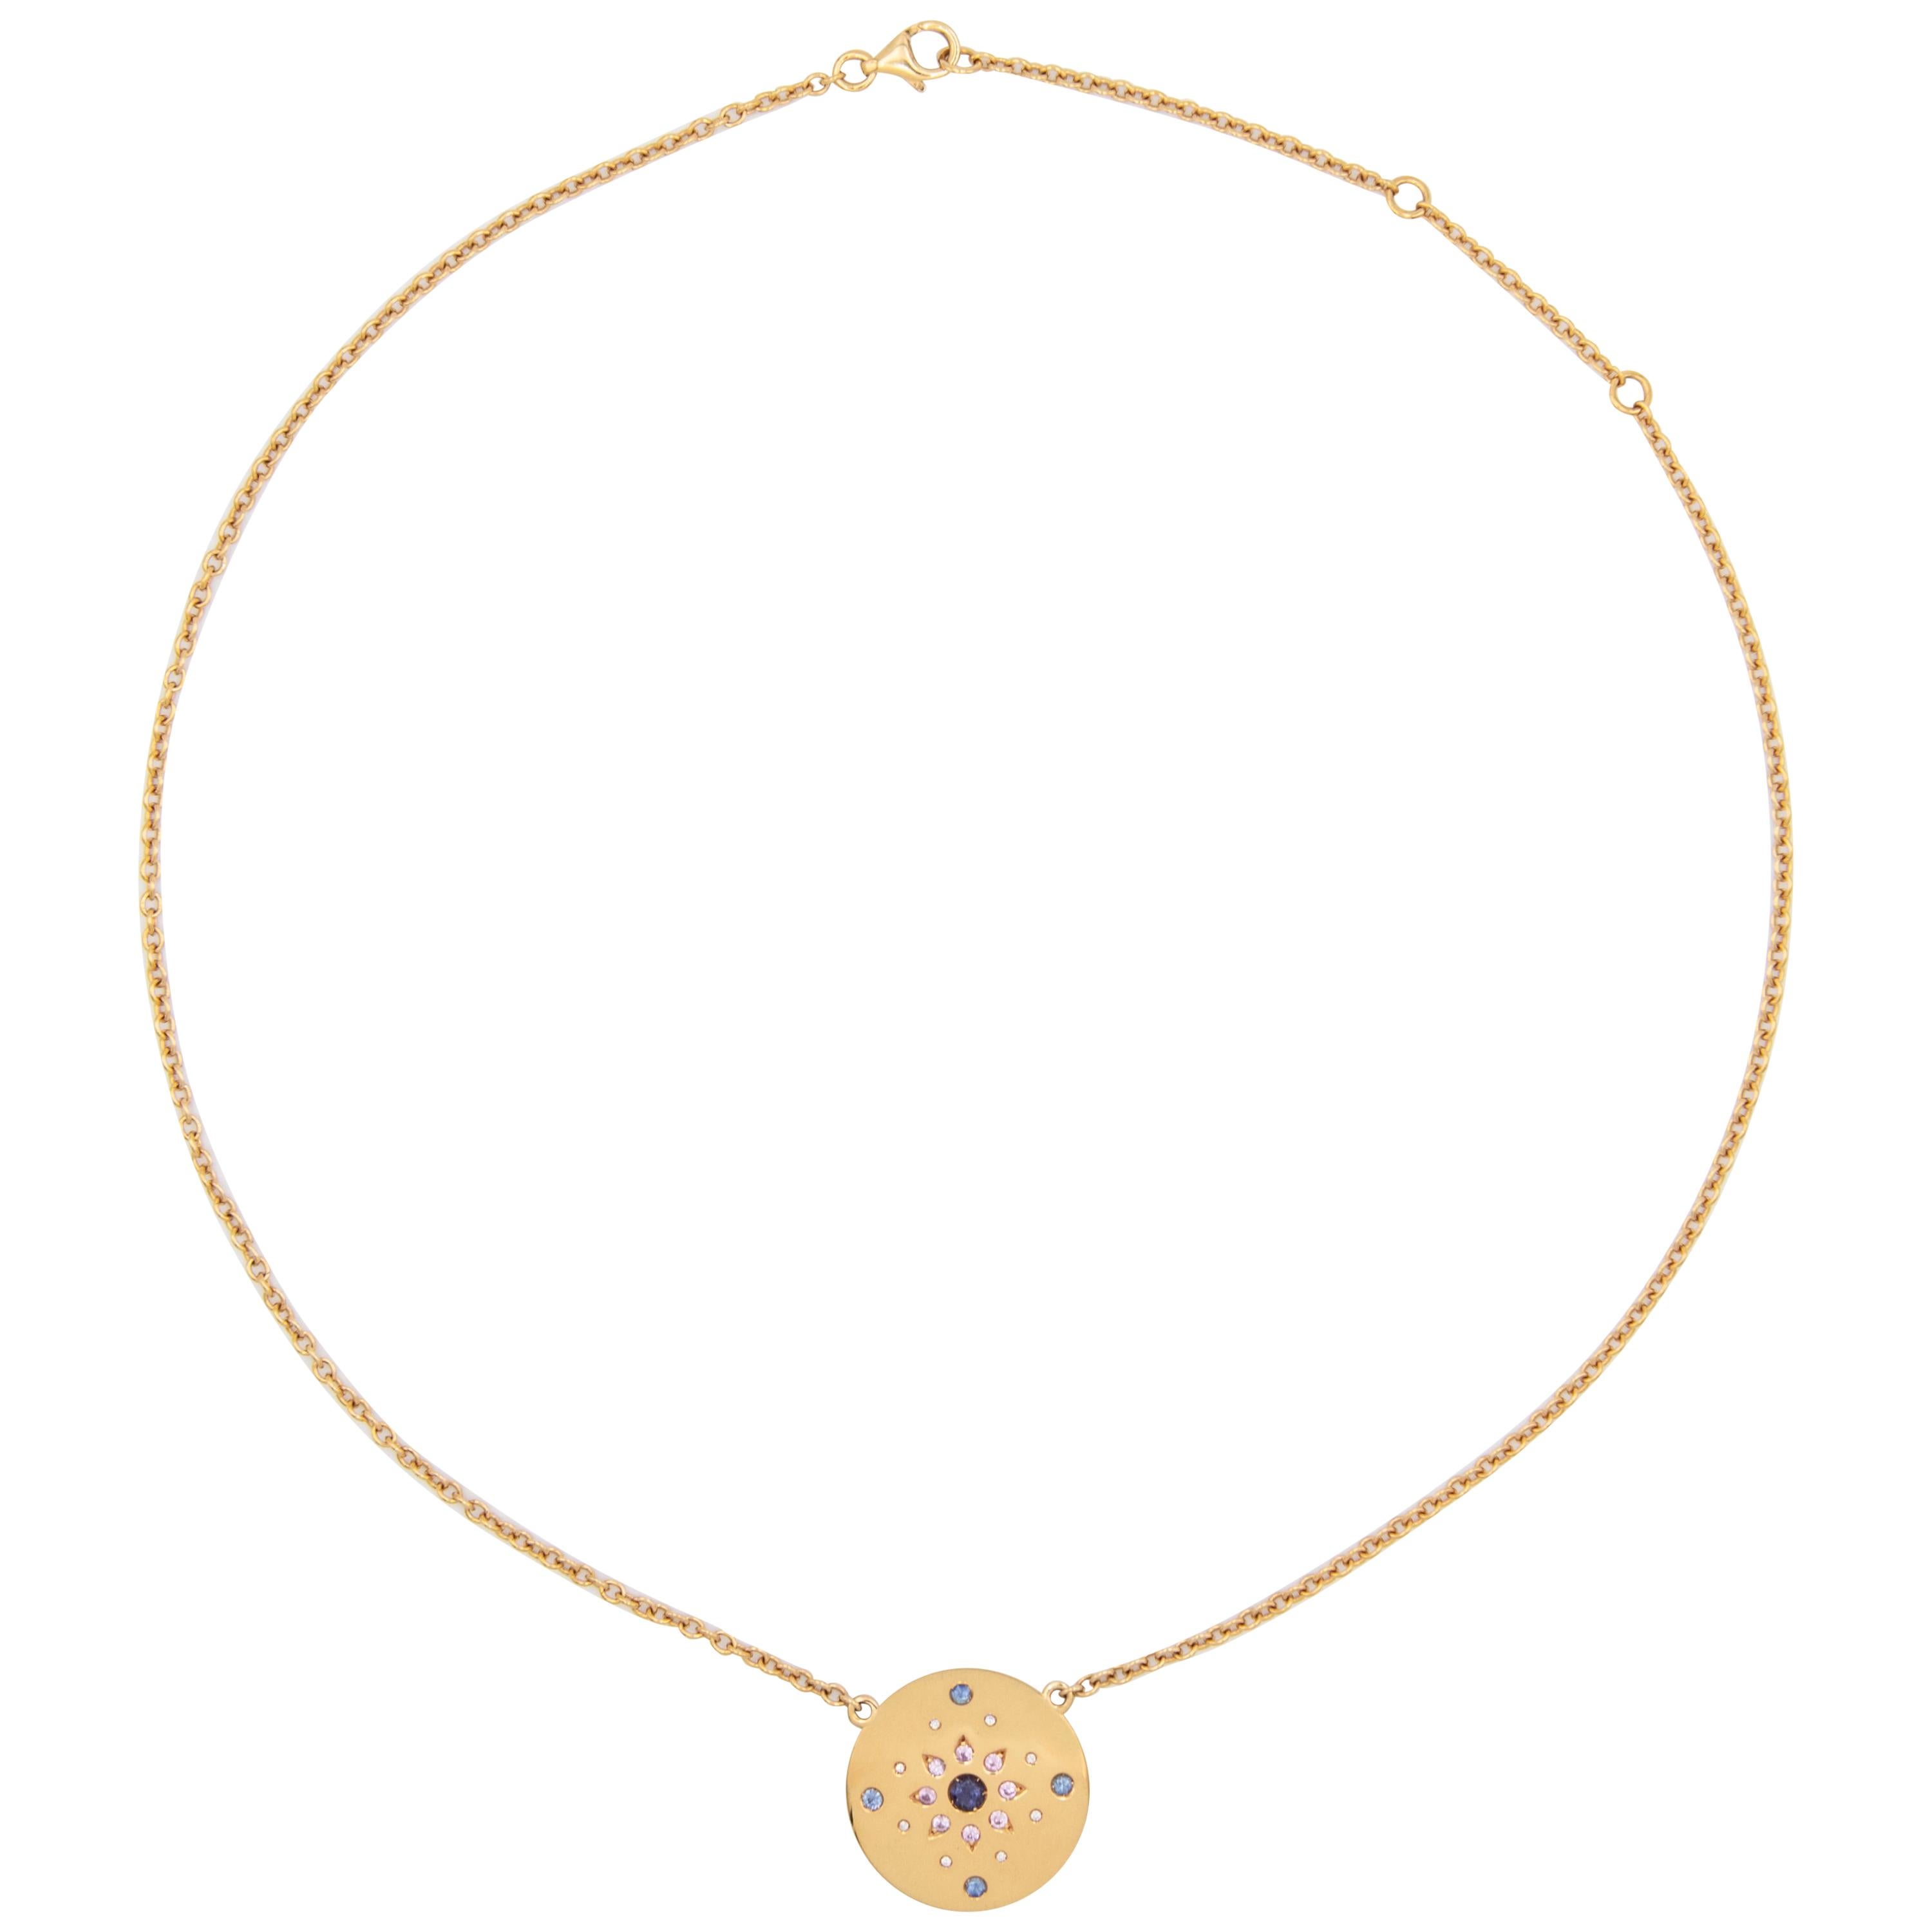 18 karat yellow gold necklace with round disc pendant and adjustable chain. The pendant is set with 21 gemstones including a central iolite, 0,28-carat of blue and pink sapphires and 0,11-carat of diamonds. 

This is the shorter chain option for